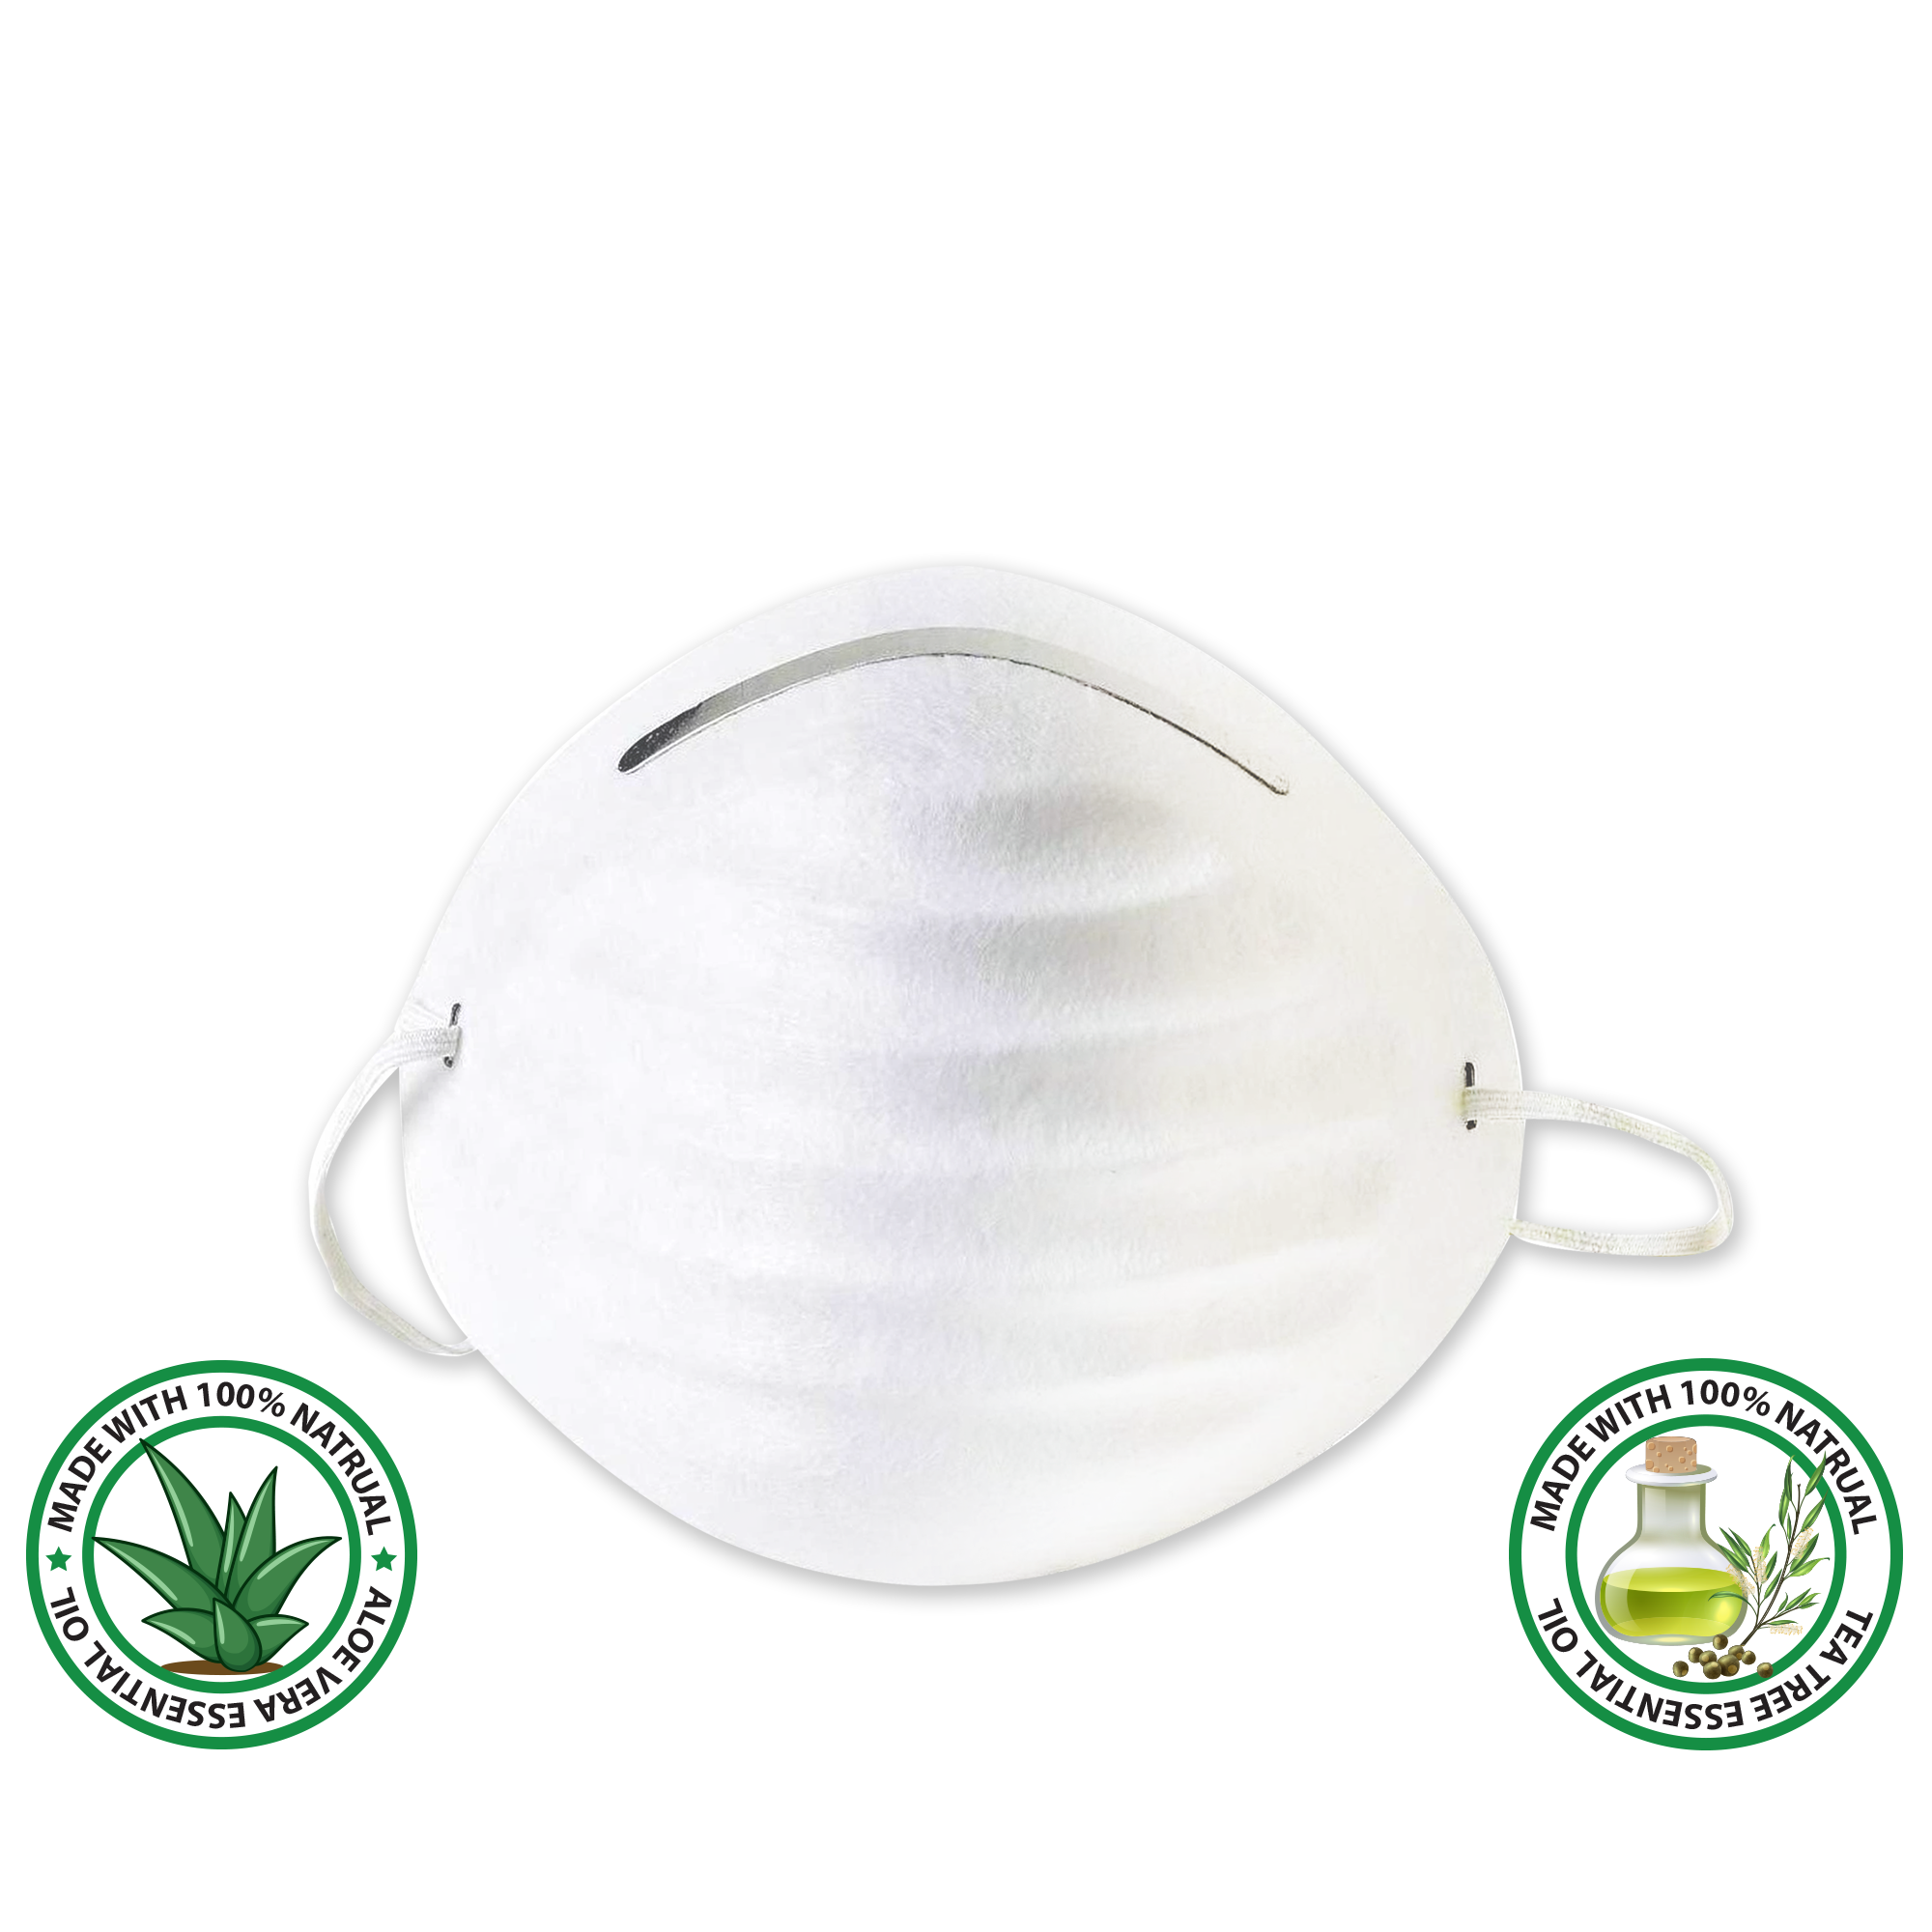 Disposable Particle Respirator Face Mask Coated in Tea Tree or Aloe Vera Essential Oil (10-Pack)- IN STOCK!